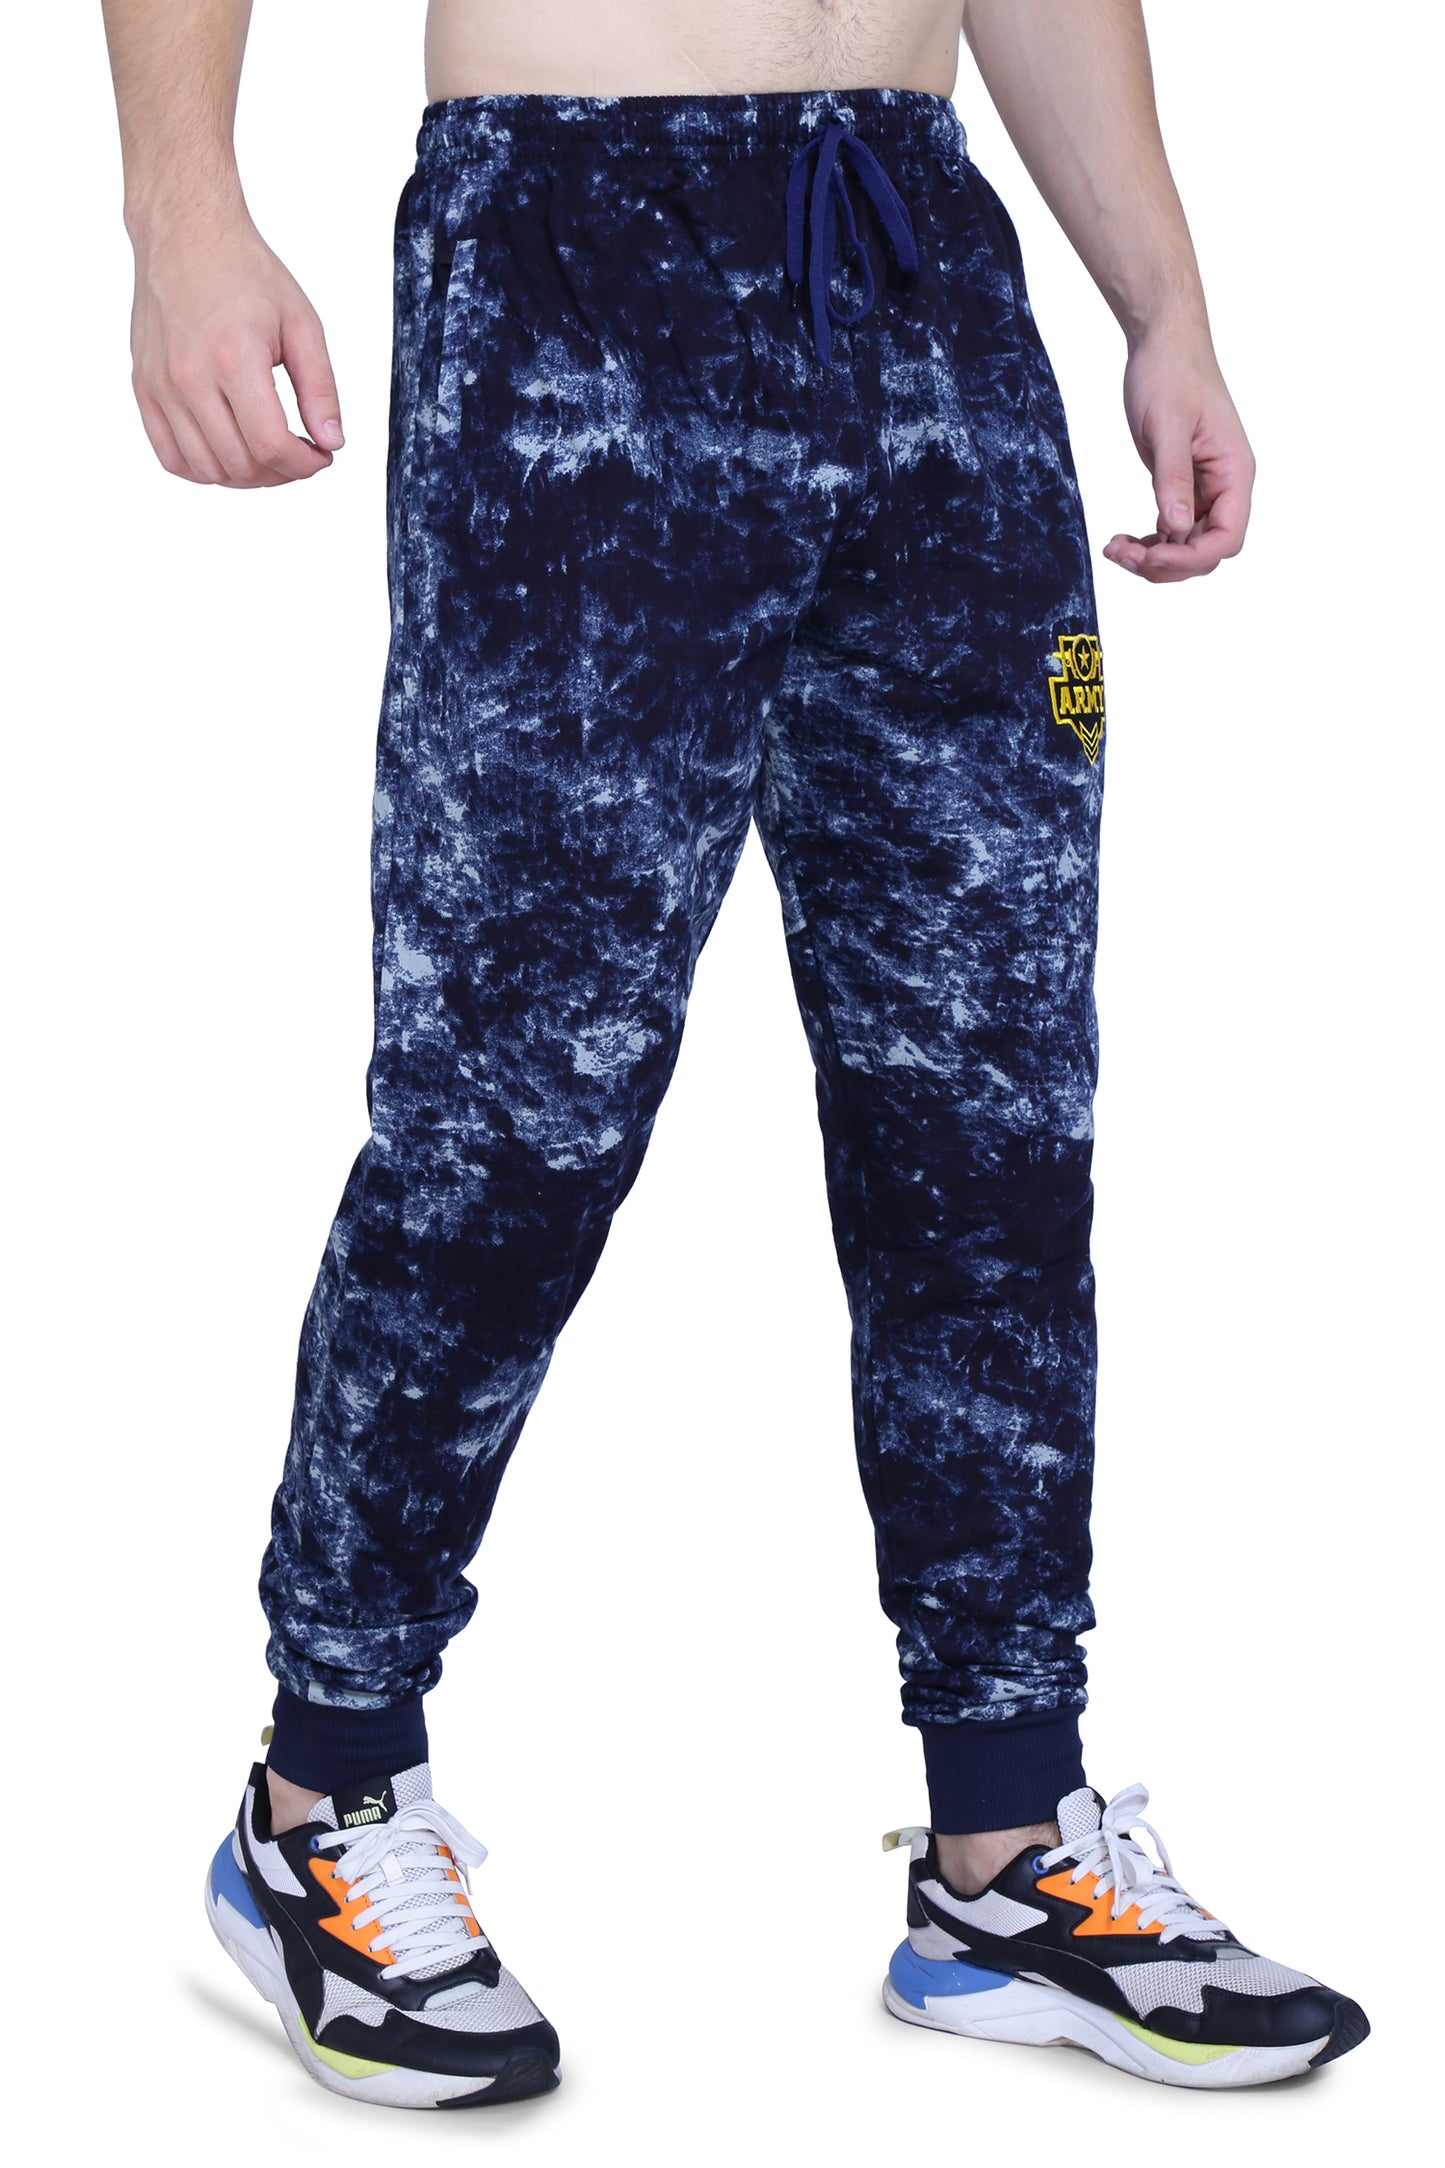 Neo Garments Men's Cotton Sweatpants All Over-Print. SP02Z | SIZES FROM M TO 7XL.